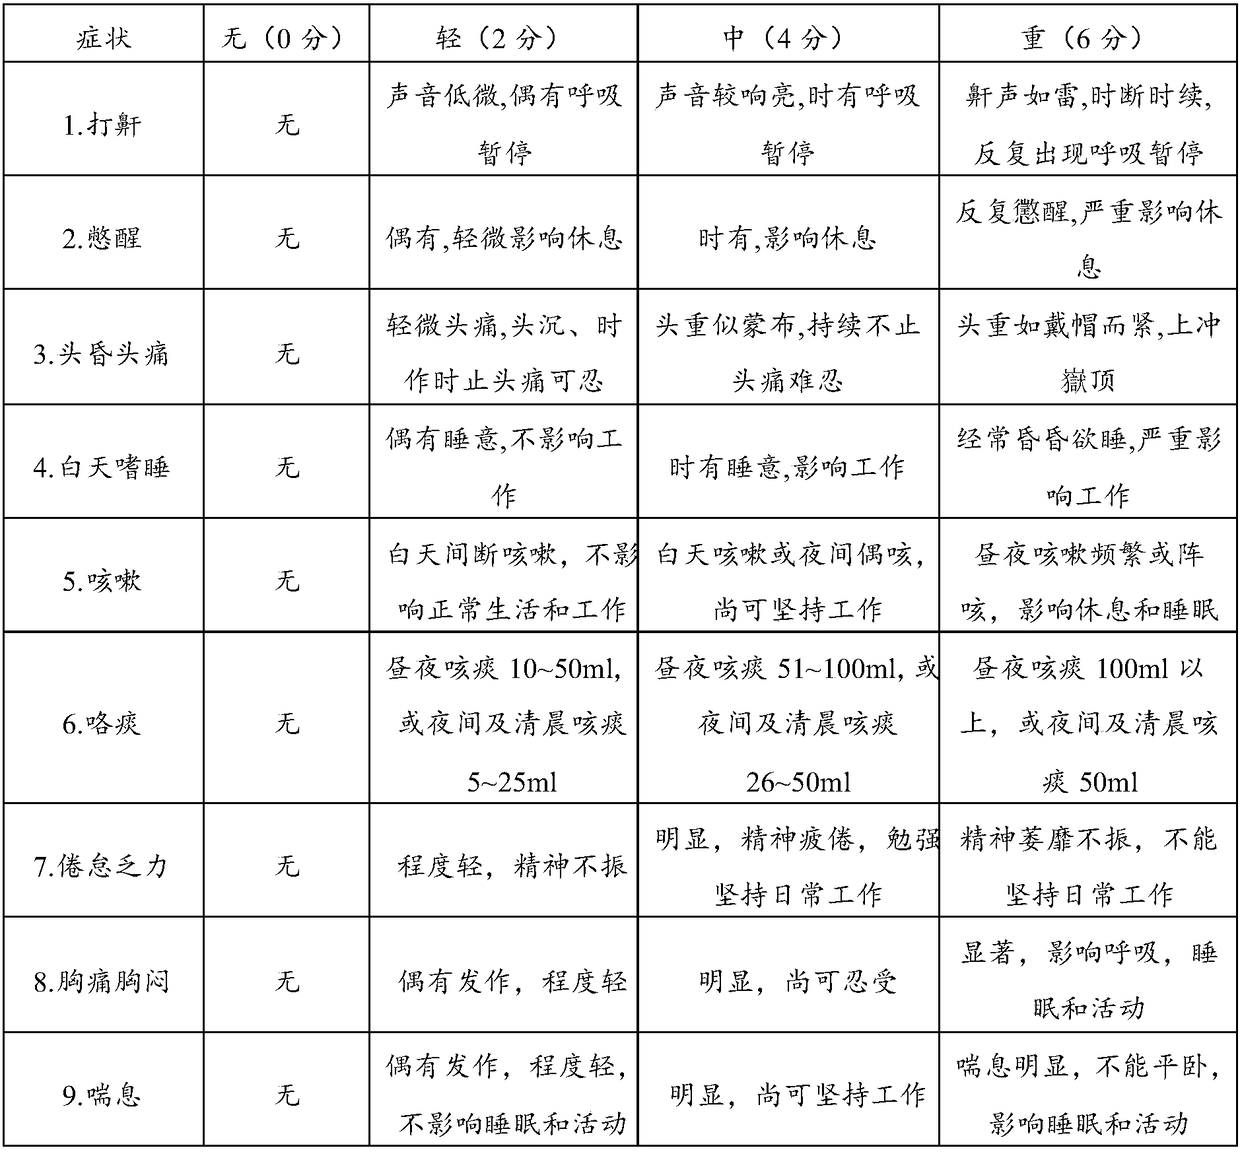 Traditional Chinese medicine composition and application thereof